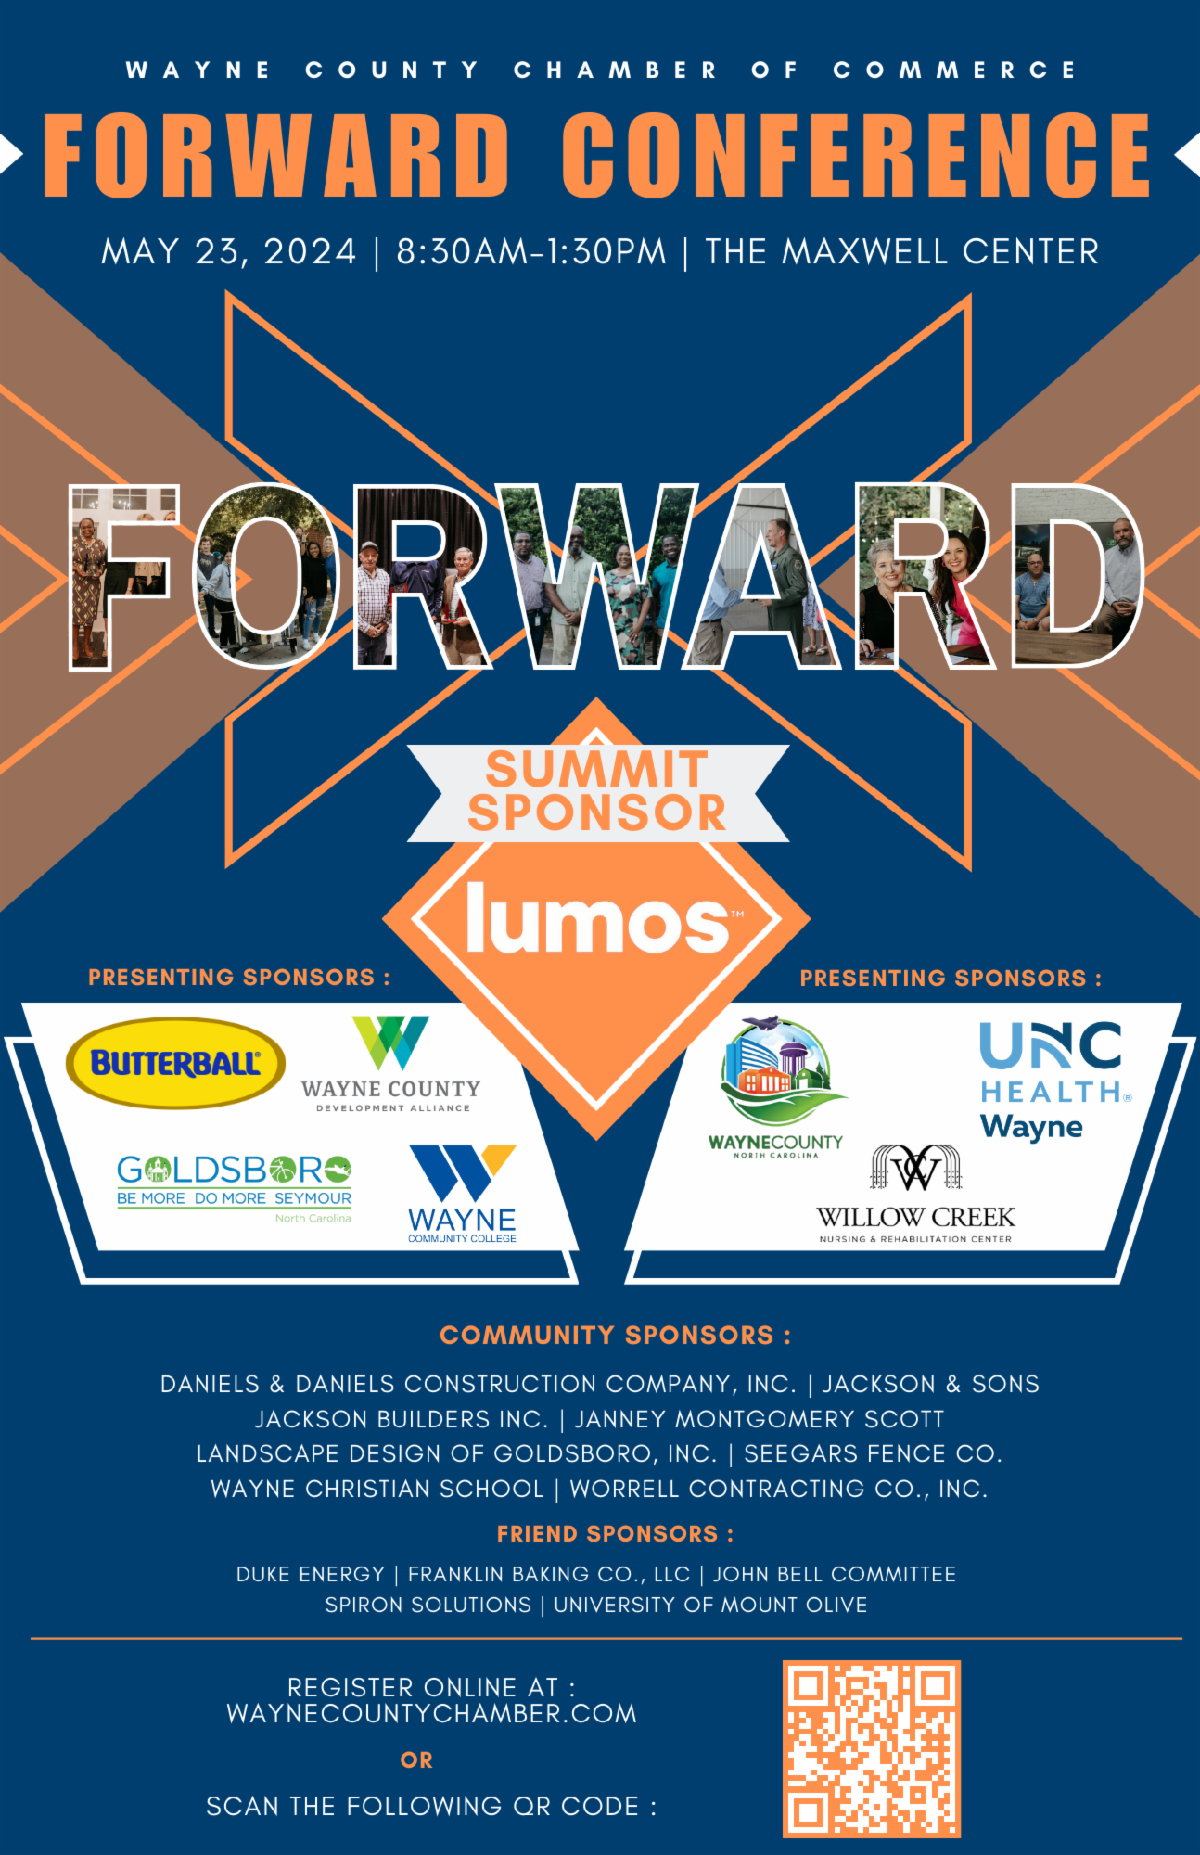 FORWARD Conference Being Held Thursday at the Maxwell Center